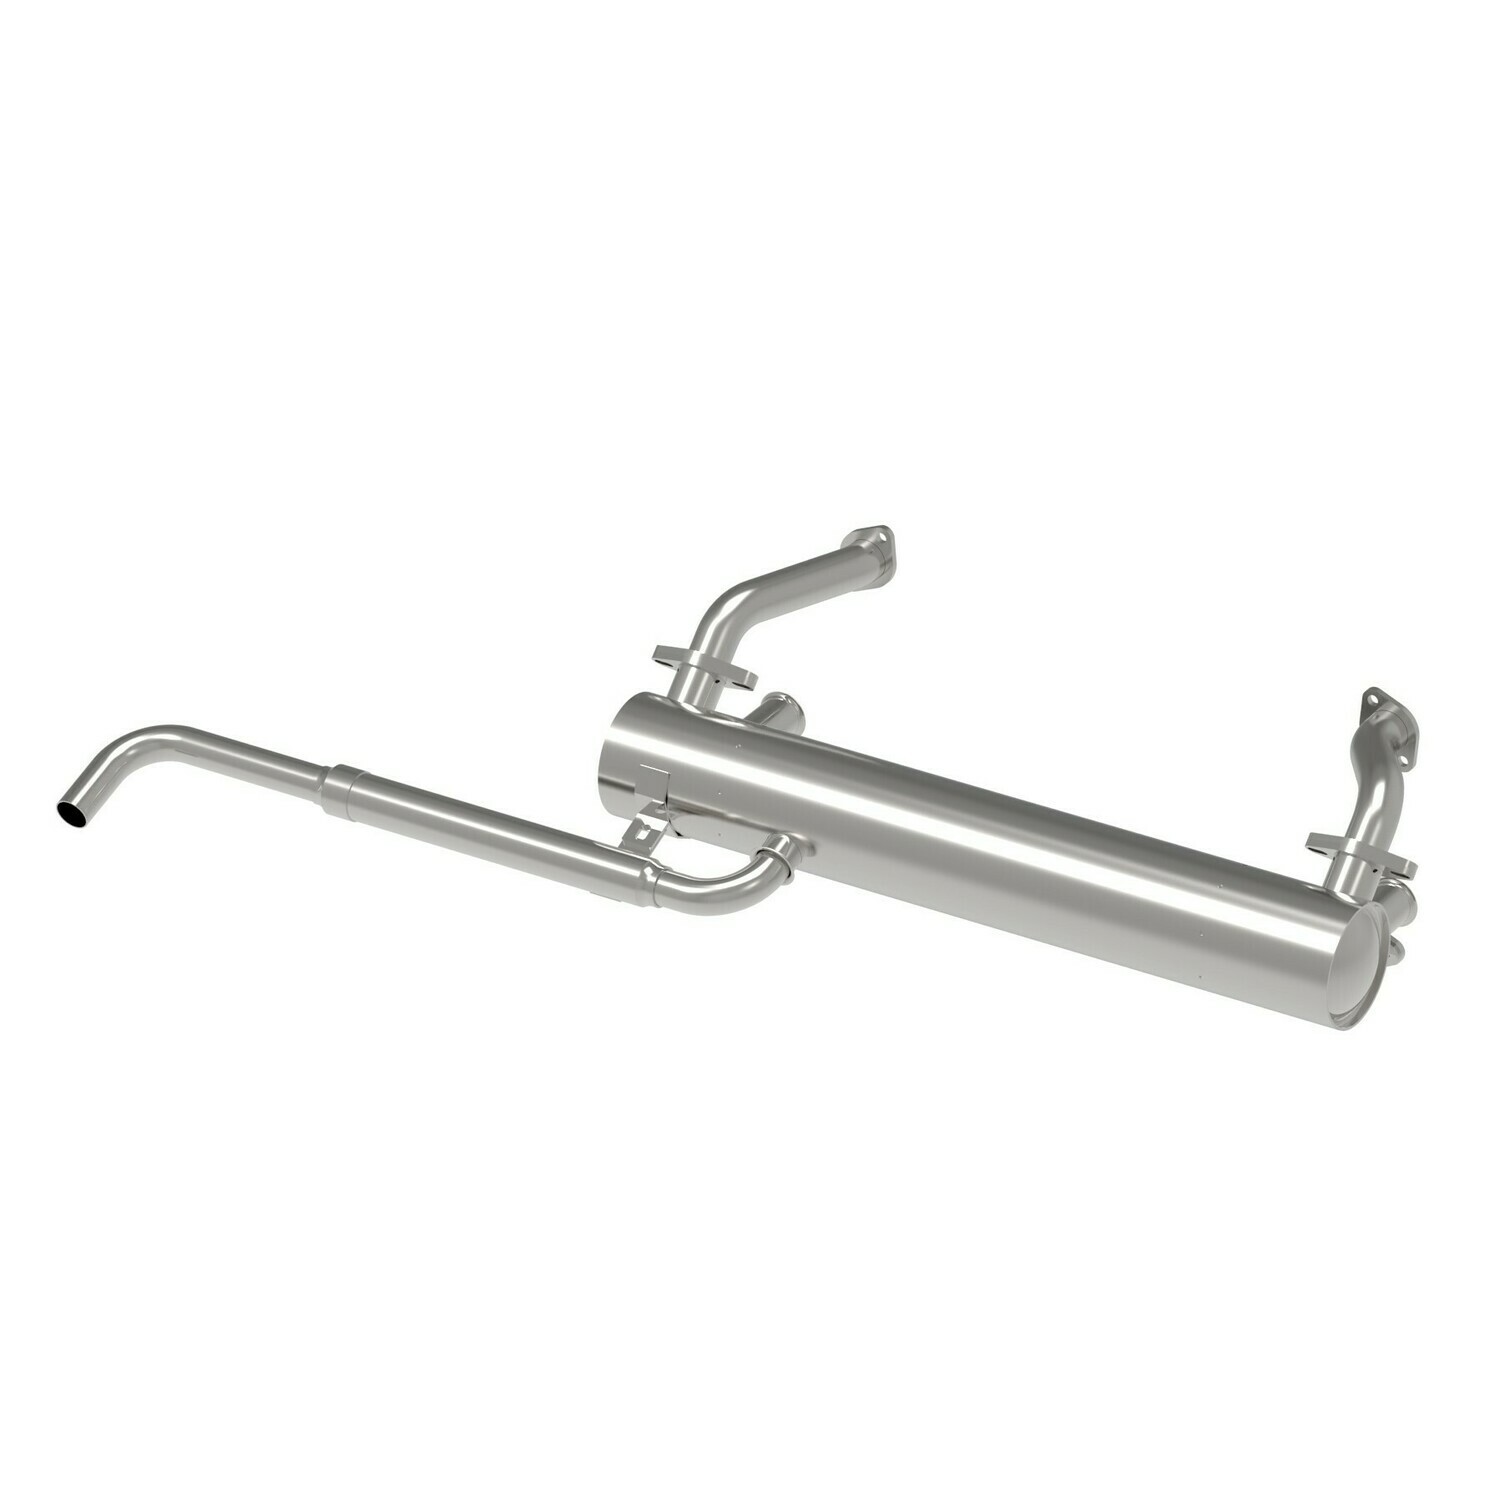 Stainless Steel BUS Muffler for 1500 cc and more (1963-1975)